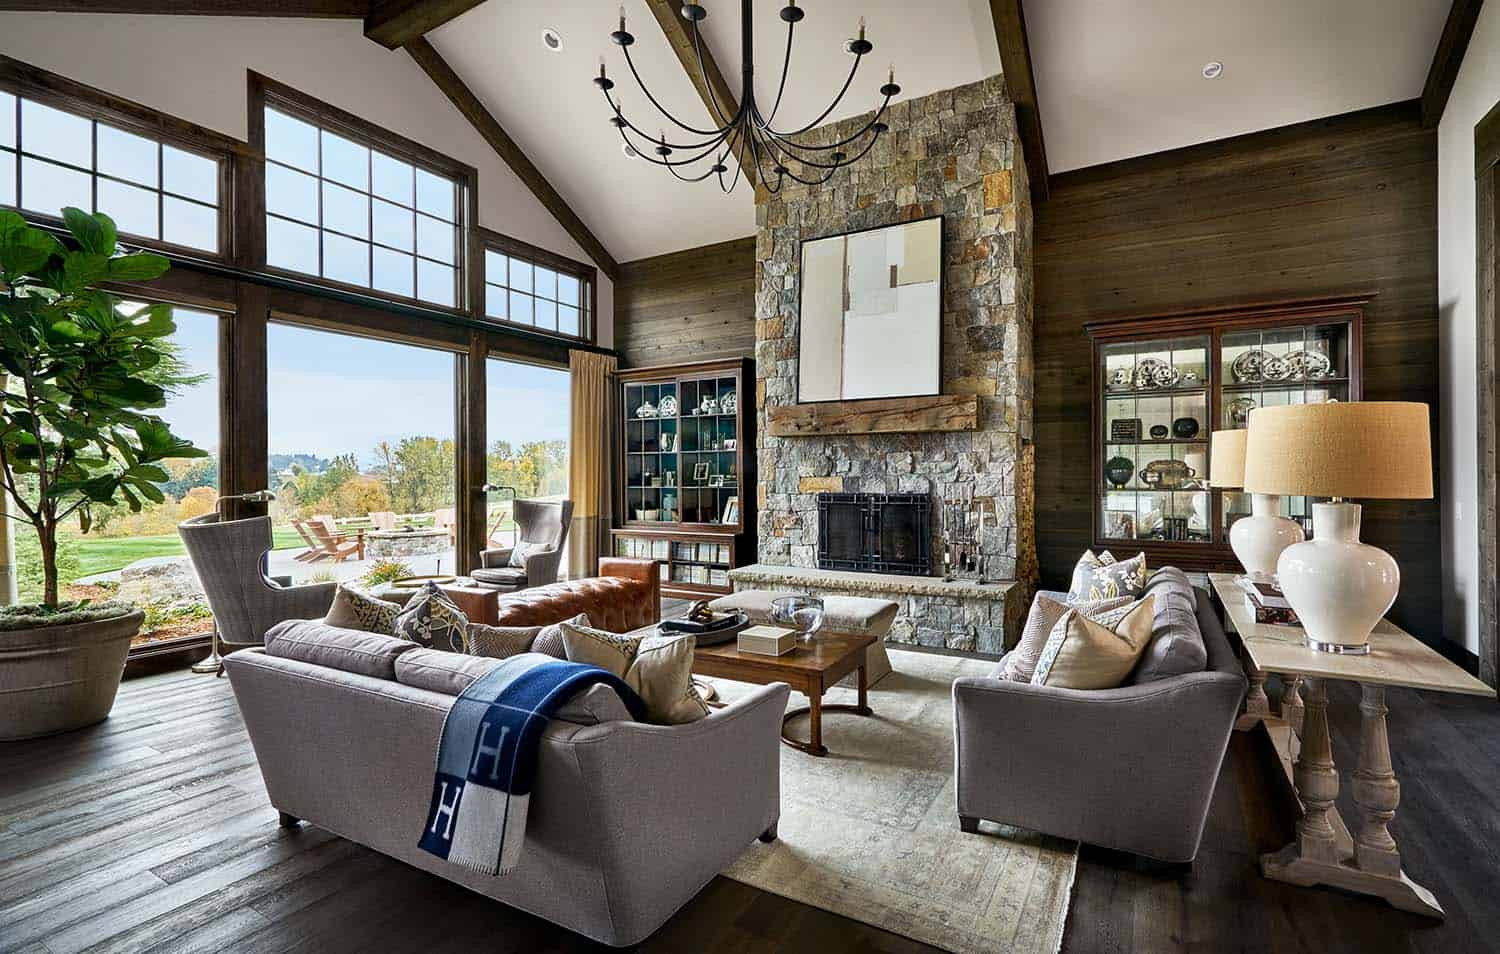 Contemporary Rustic Living Room
 Contemporary rustic farmhouse with stunning living spaces